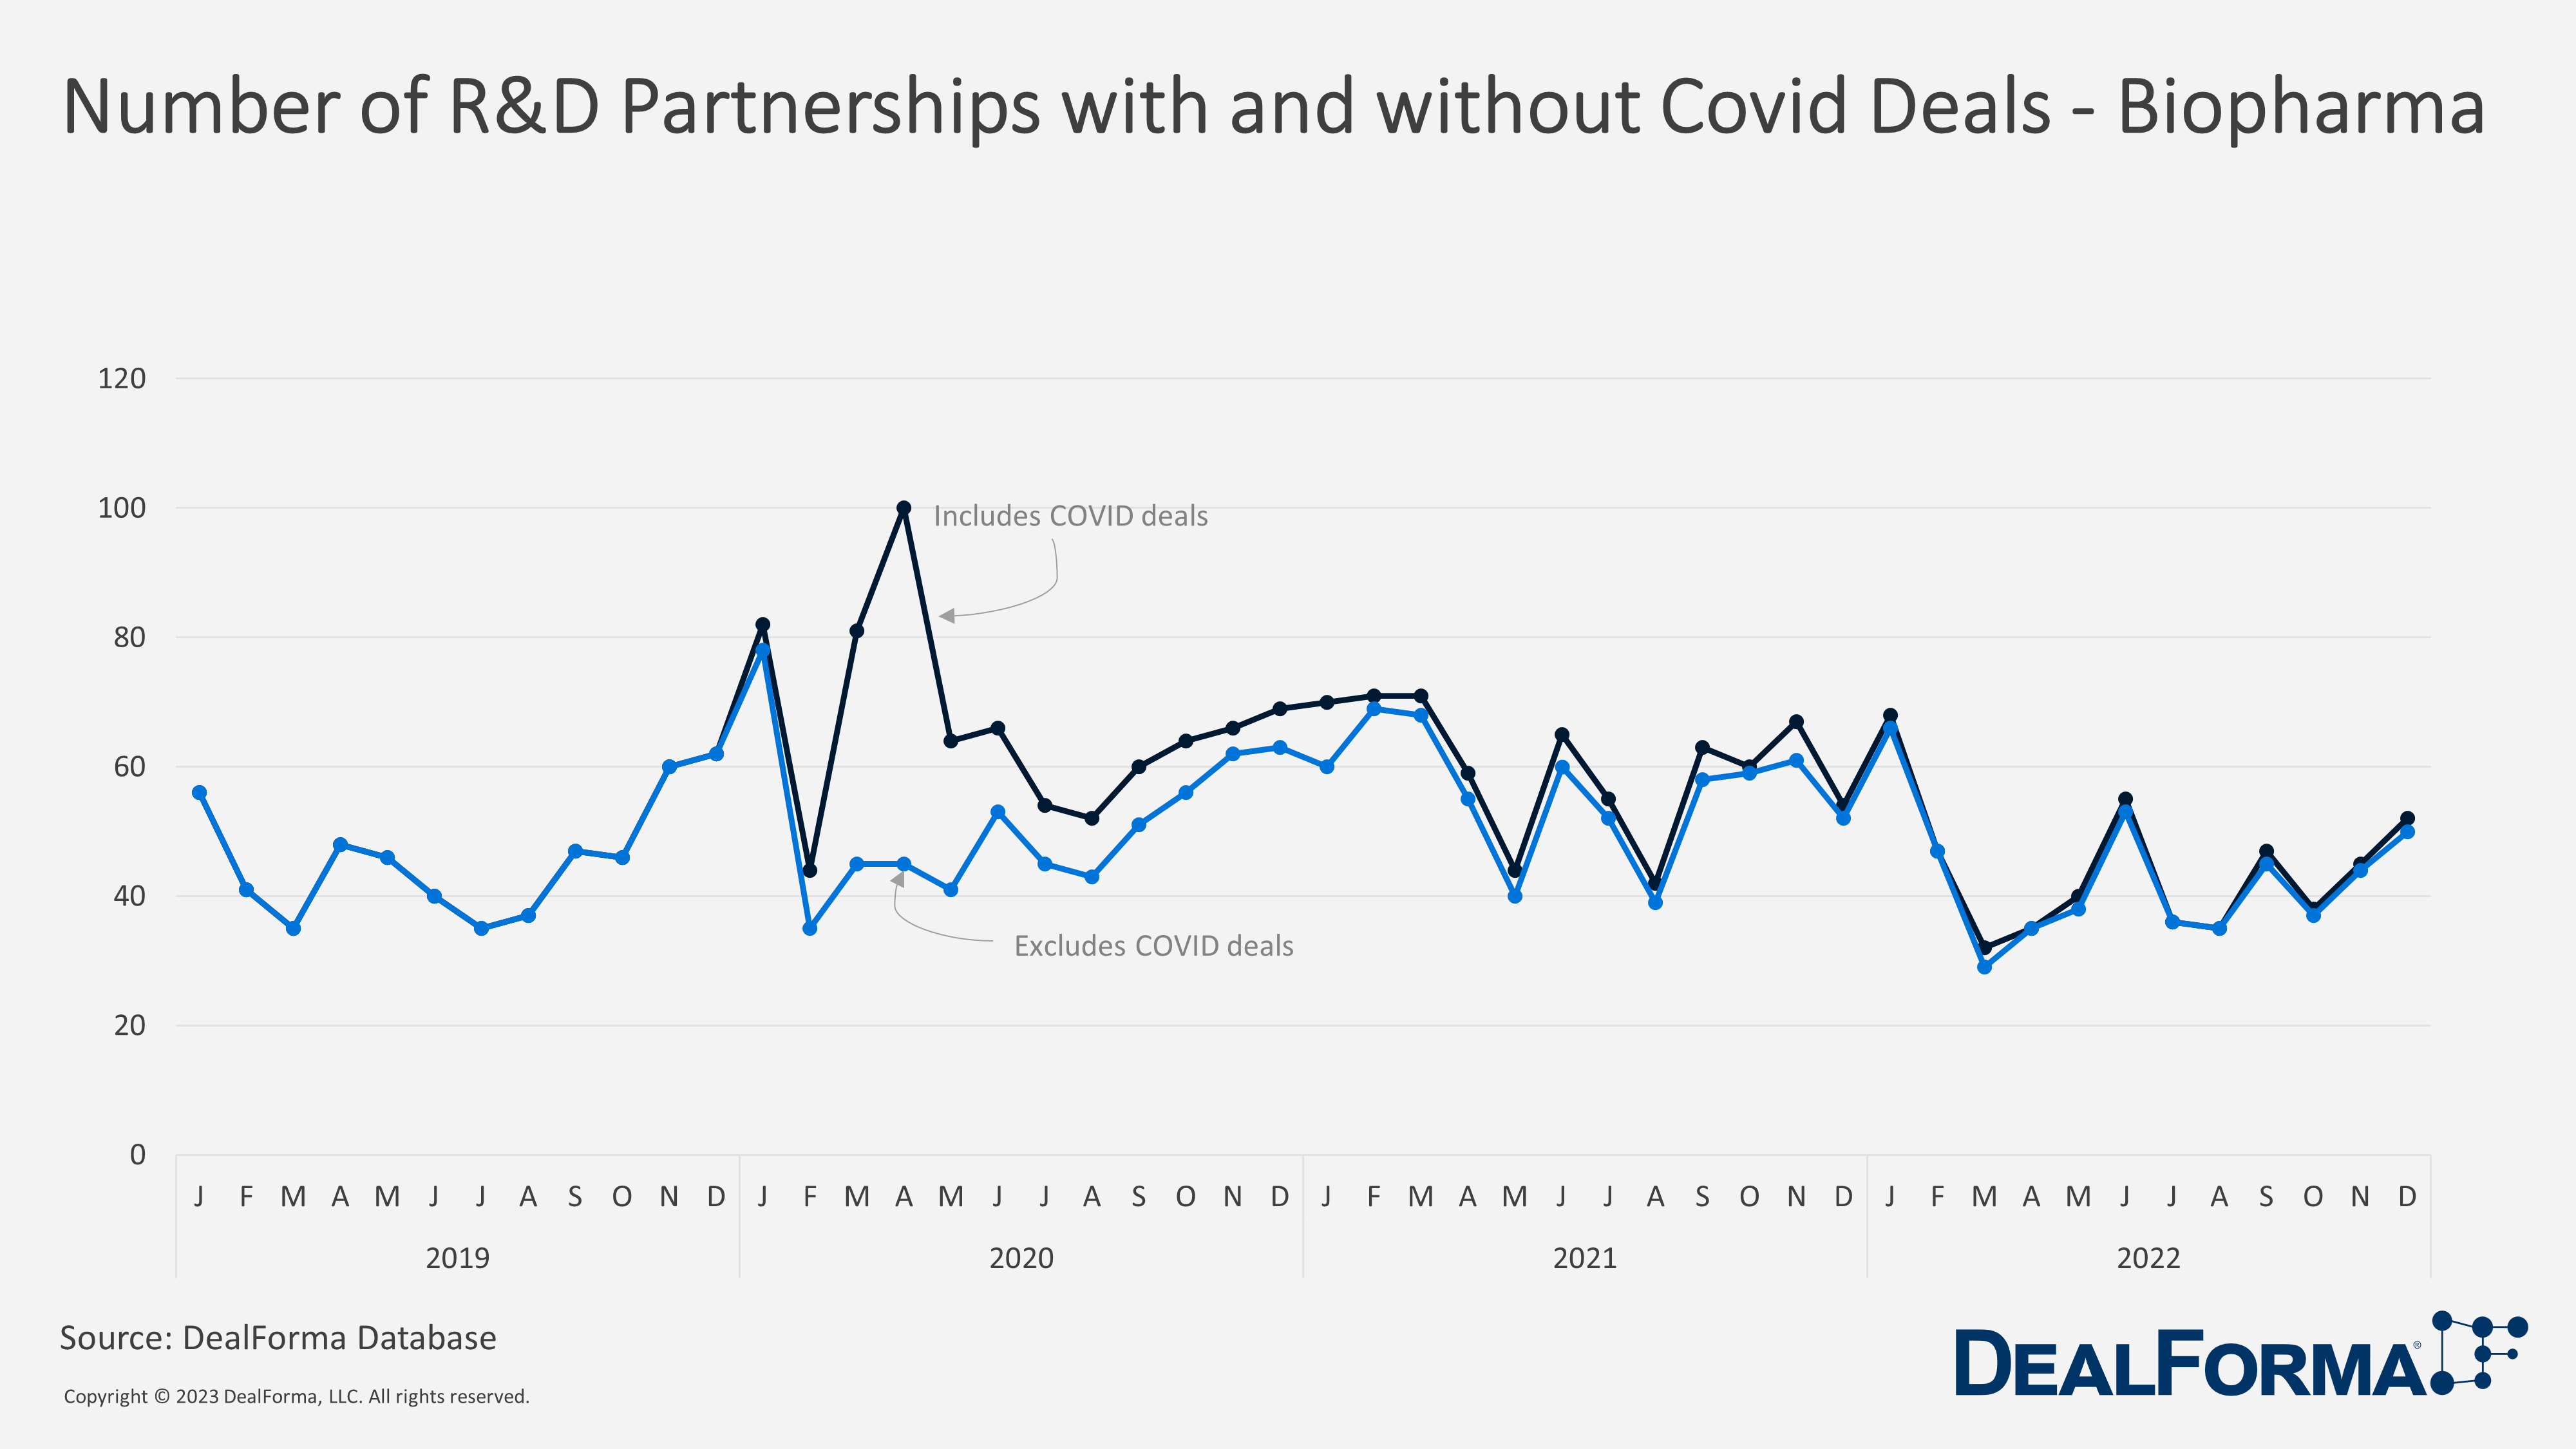 Number of R&D Partnerships with and without Covid Deaths - Biopharma